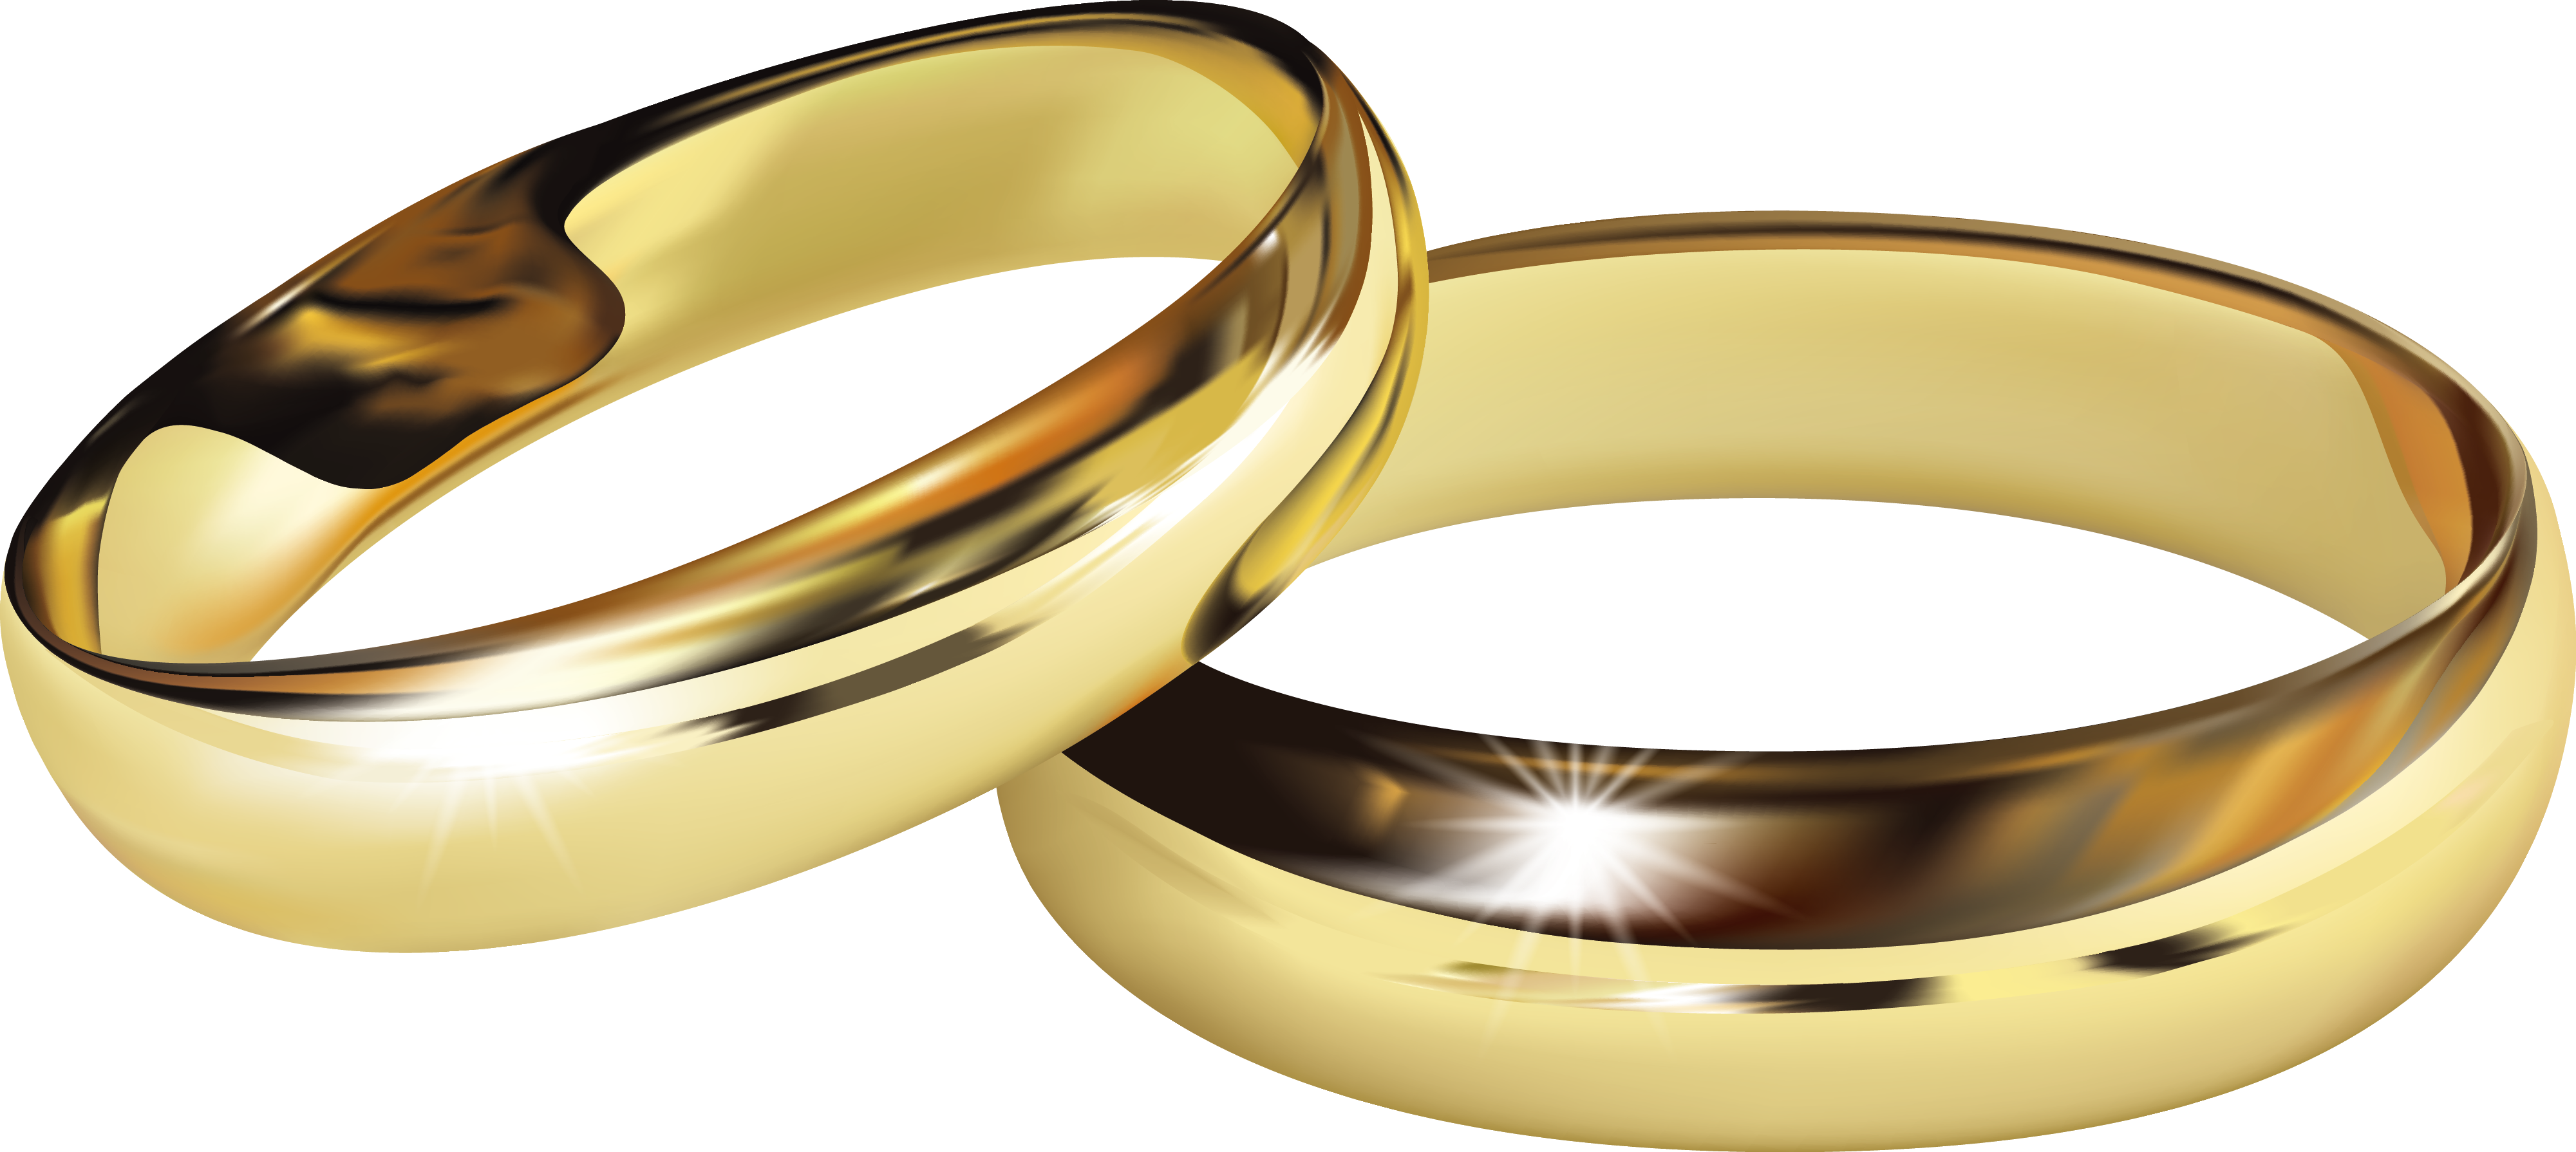 wedding ring png clipart jewelry ring png images free download free transparent png logos wedding ring png clipart jewelry ring